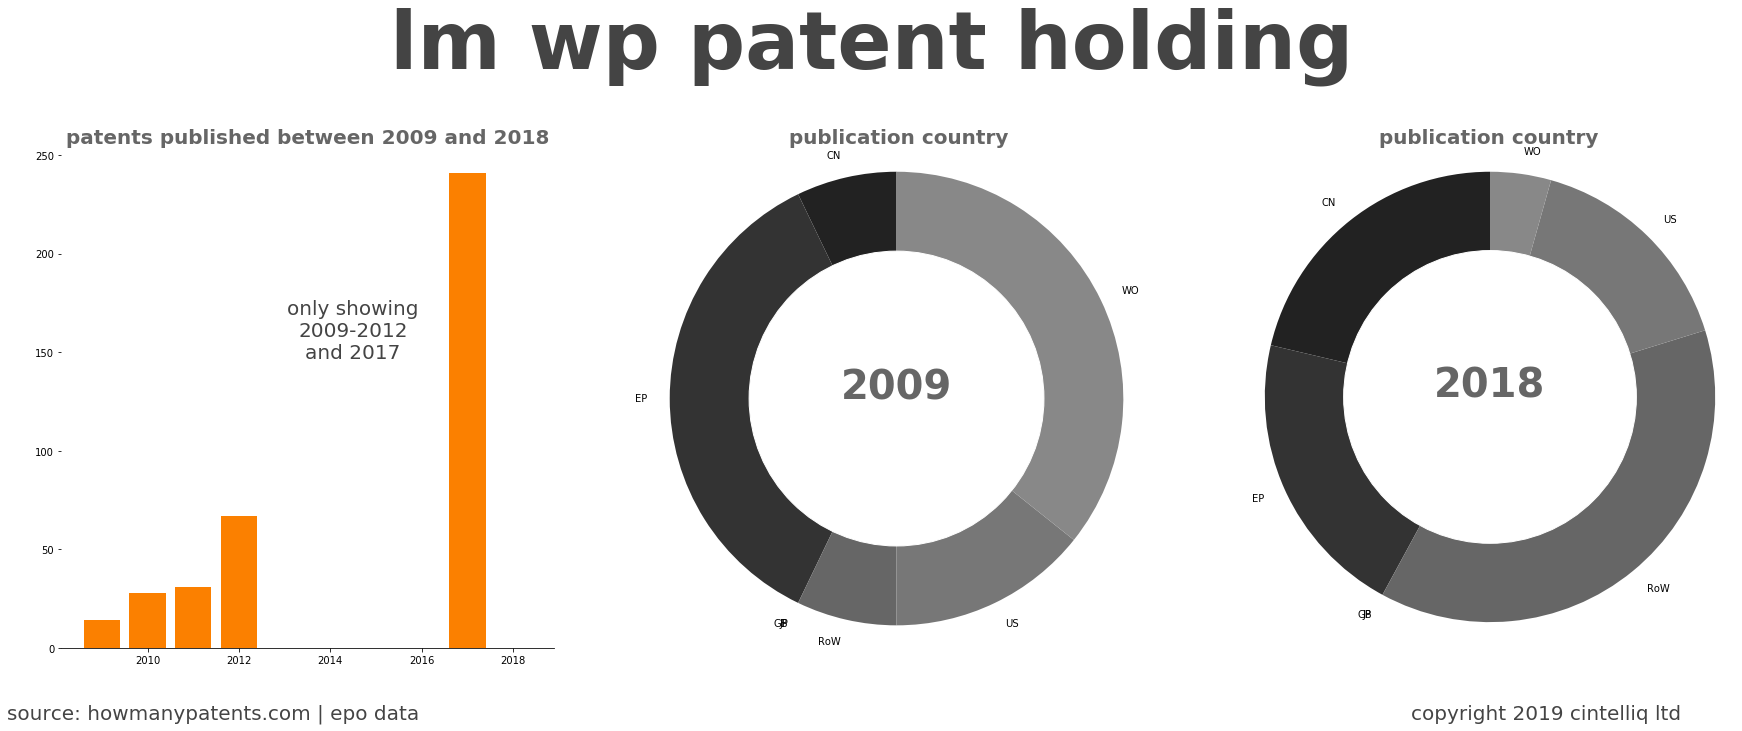 summary of patents for Lm Wp Patent Holding